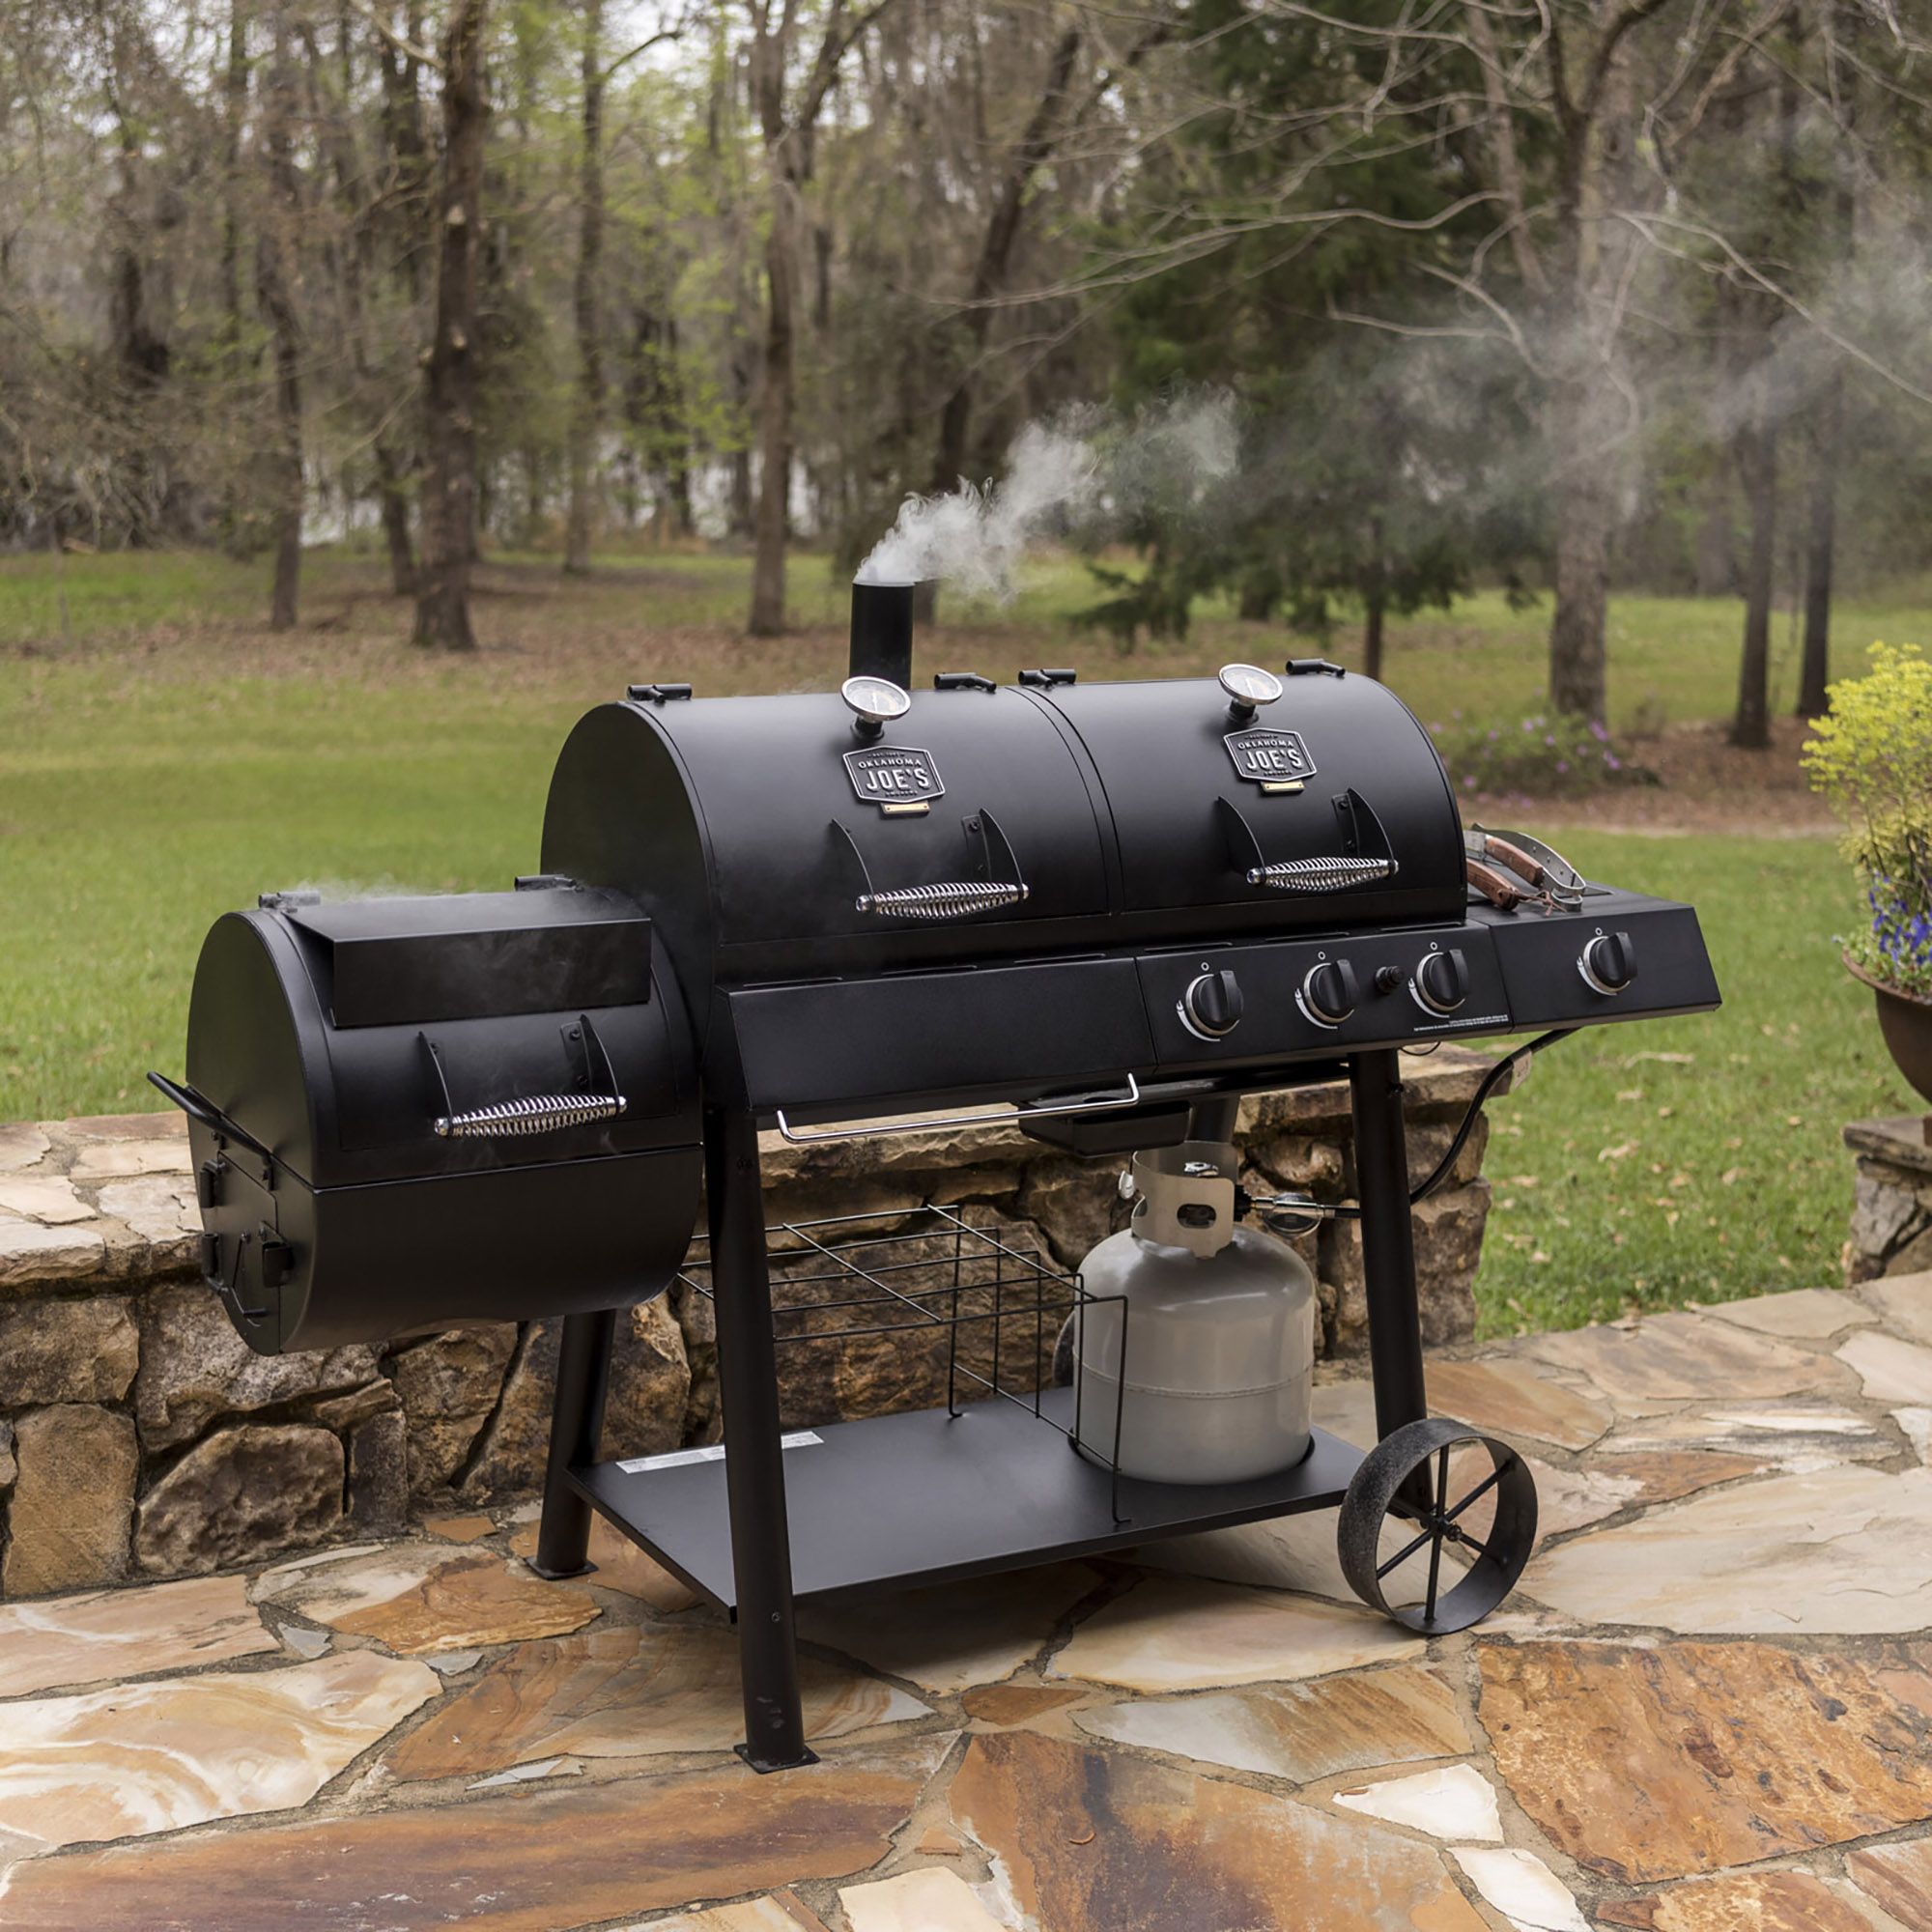 10 Essential BBQ Grill and Smoker Accessories - King of the Coals